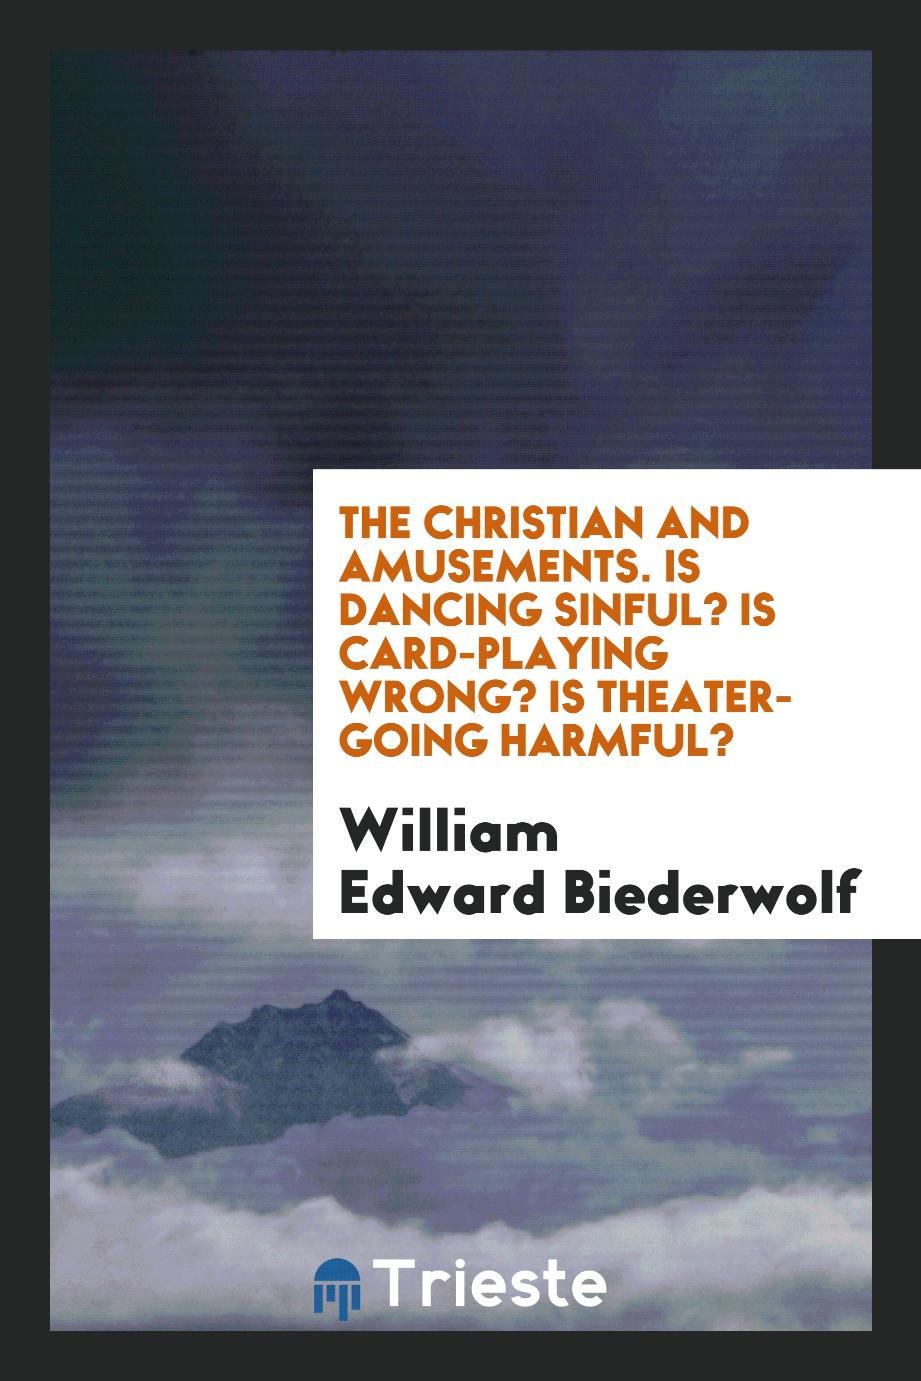 The Christian and amusements. Is dancing sinful? Is card-playing wrong? Is theater-going harmful?